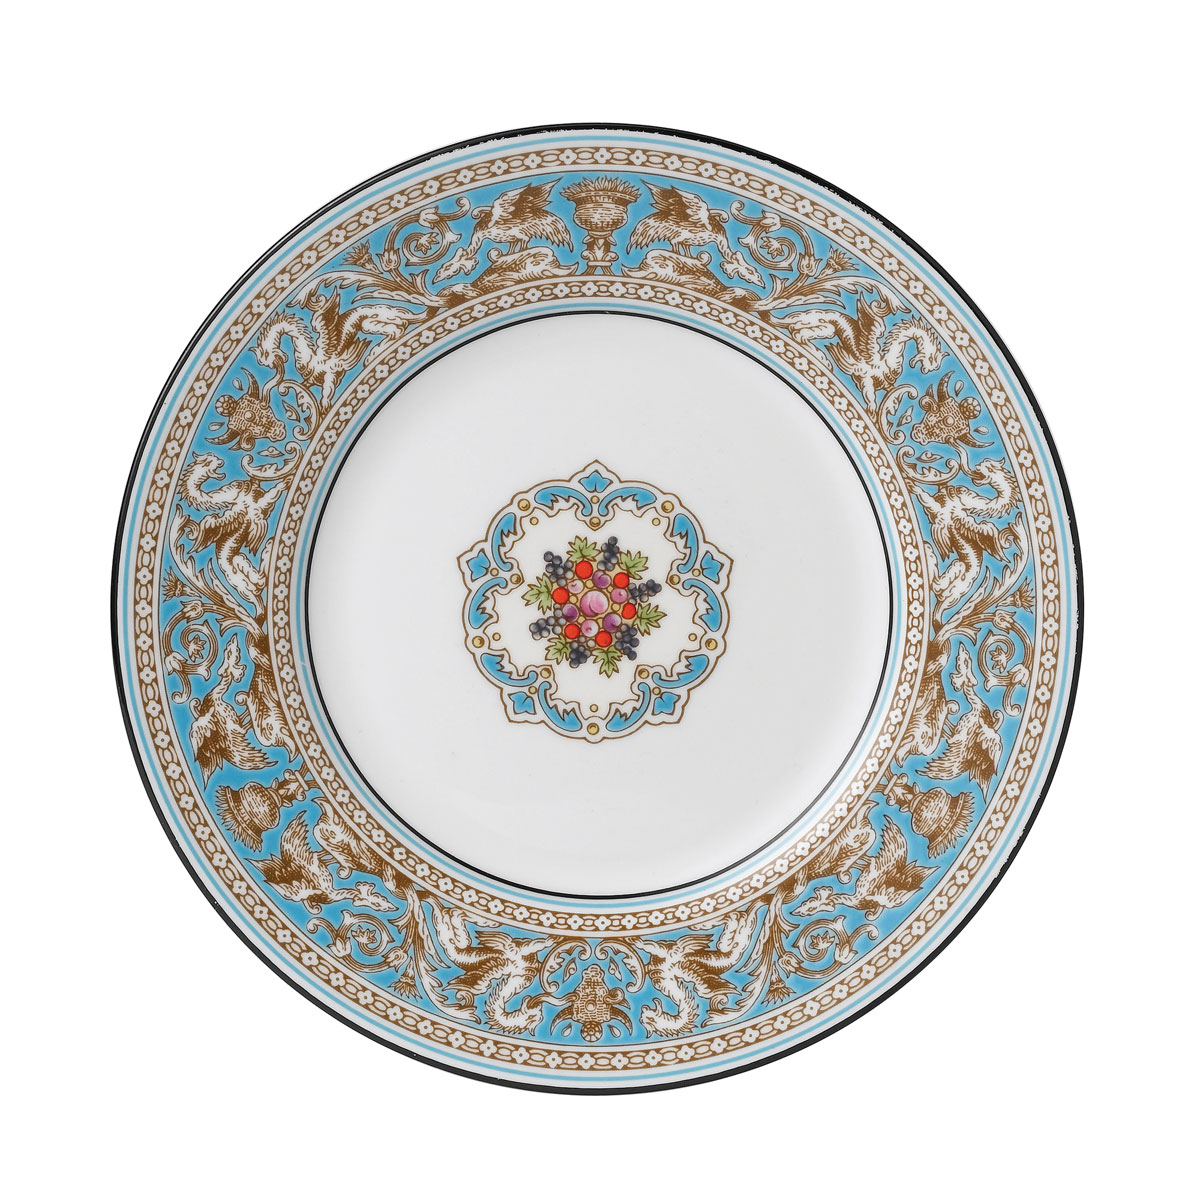 Wedgwood Florentine Turquoise Bread and Butter Plate, Single